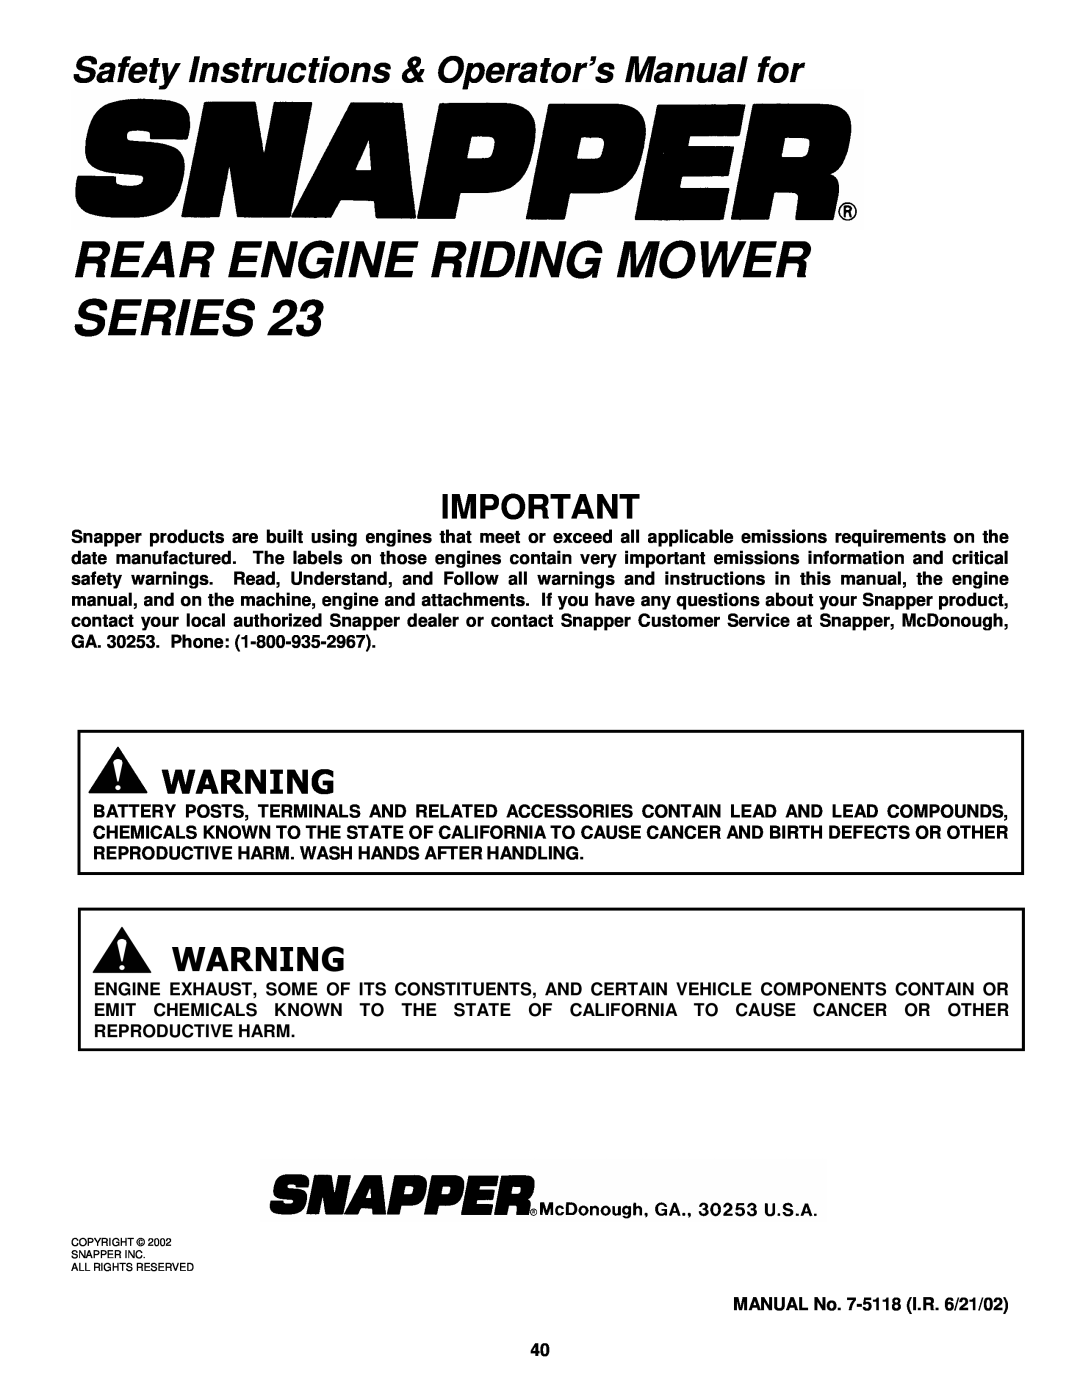 Snapper important safety instructions Rear Engine Riding Mower Series, Safety Instructions & Operator’s Manual for 